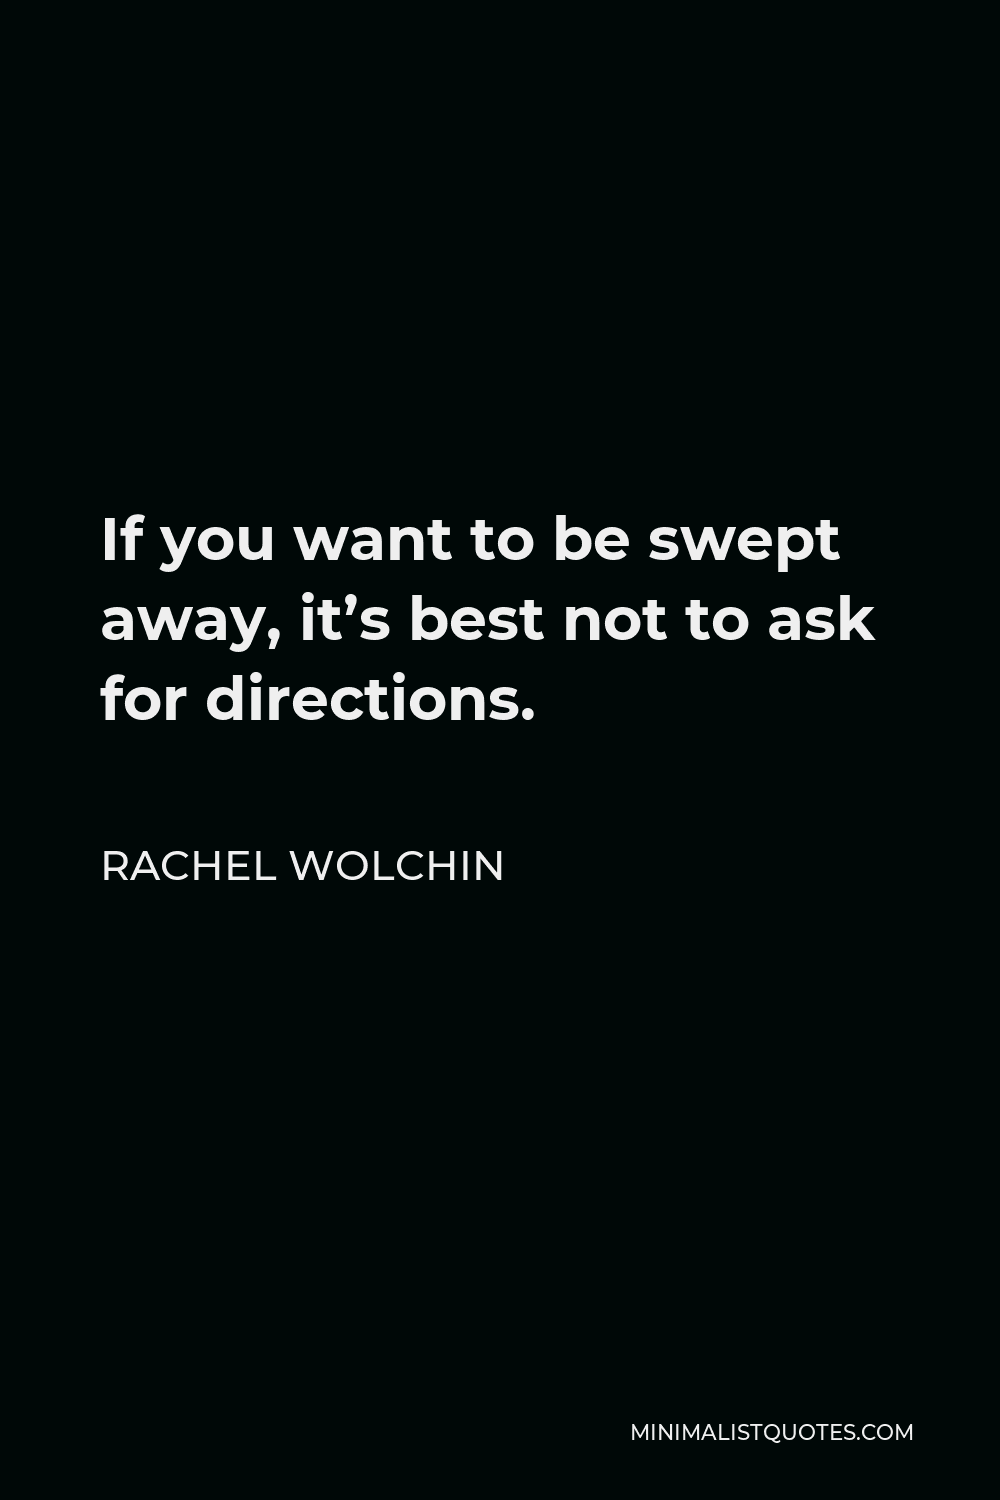 Rachel Wolchin Quote - If you want to be swept away, it’s best not to ask for directions.